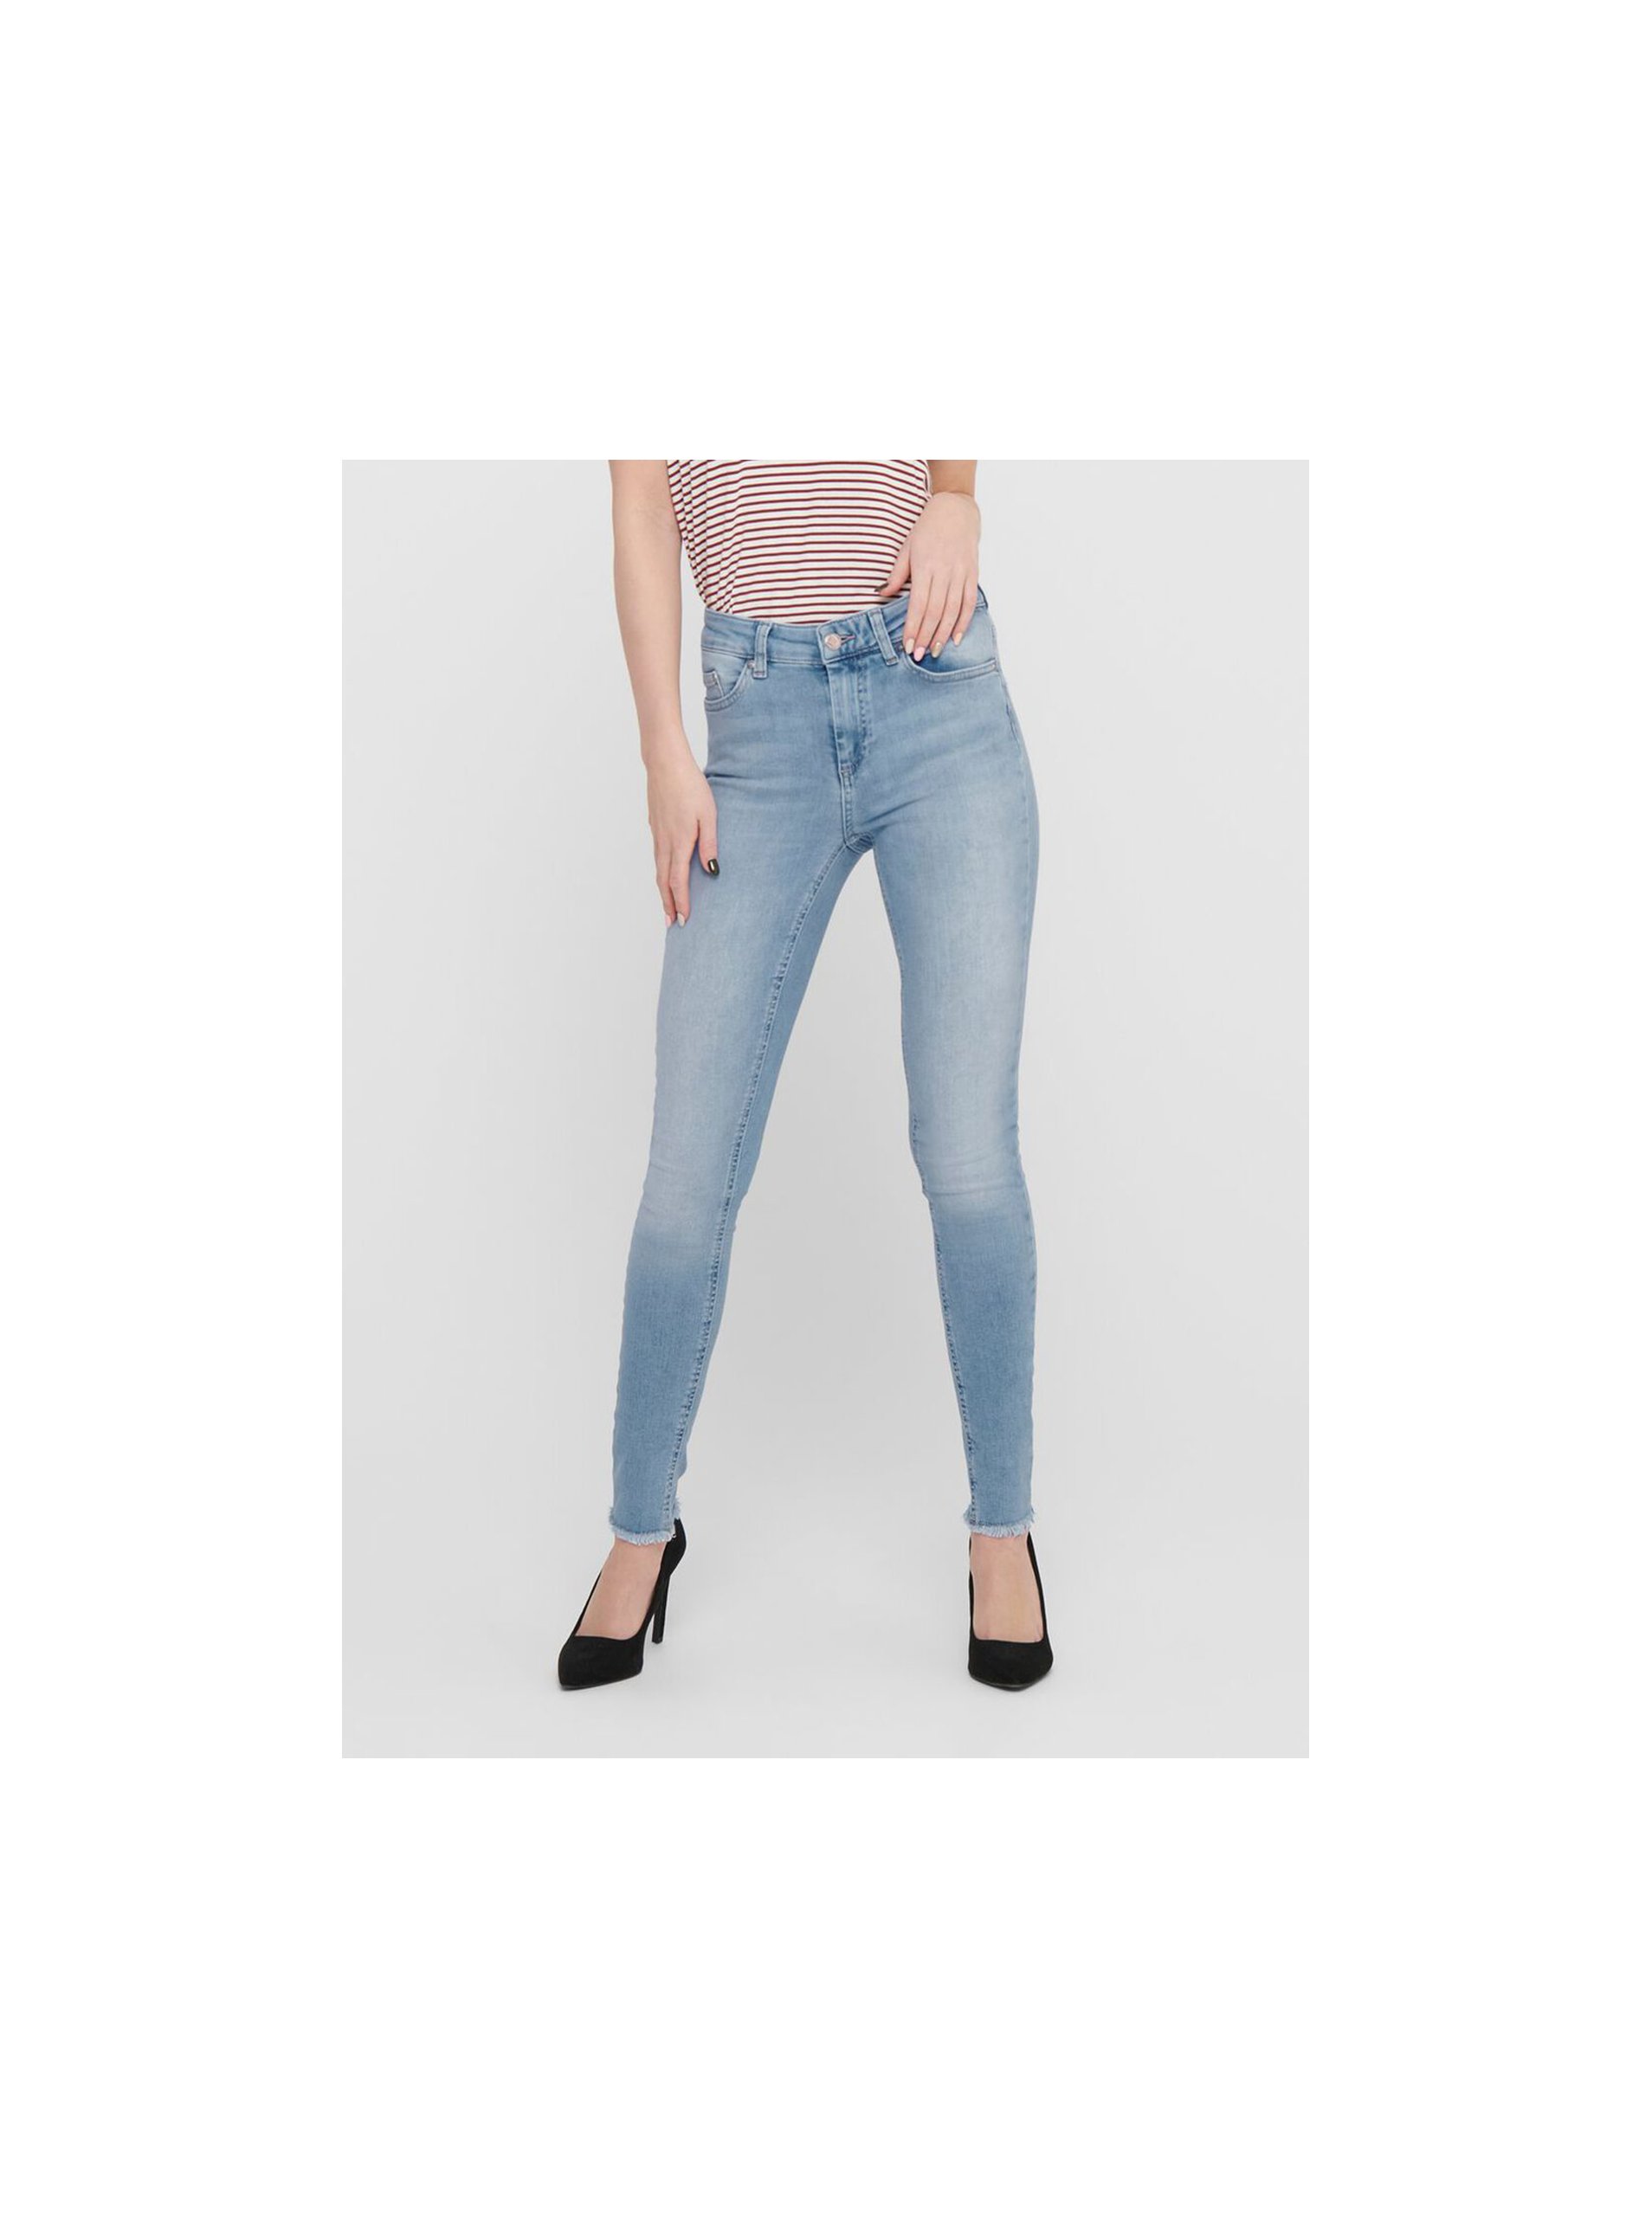 Blue Skinny Fit Skinned Jeans ONLY Blush - Women